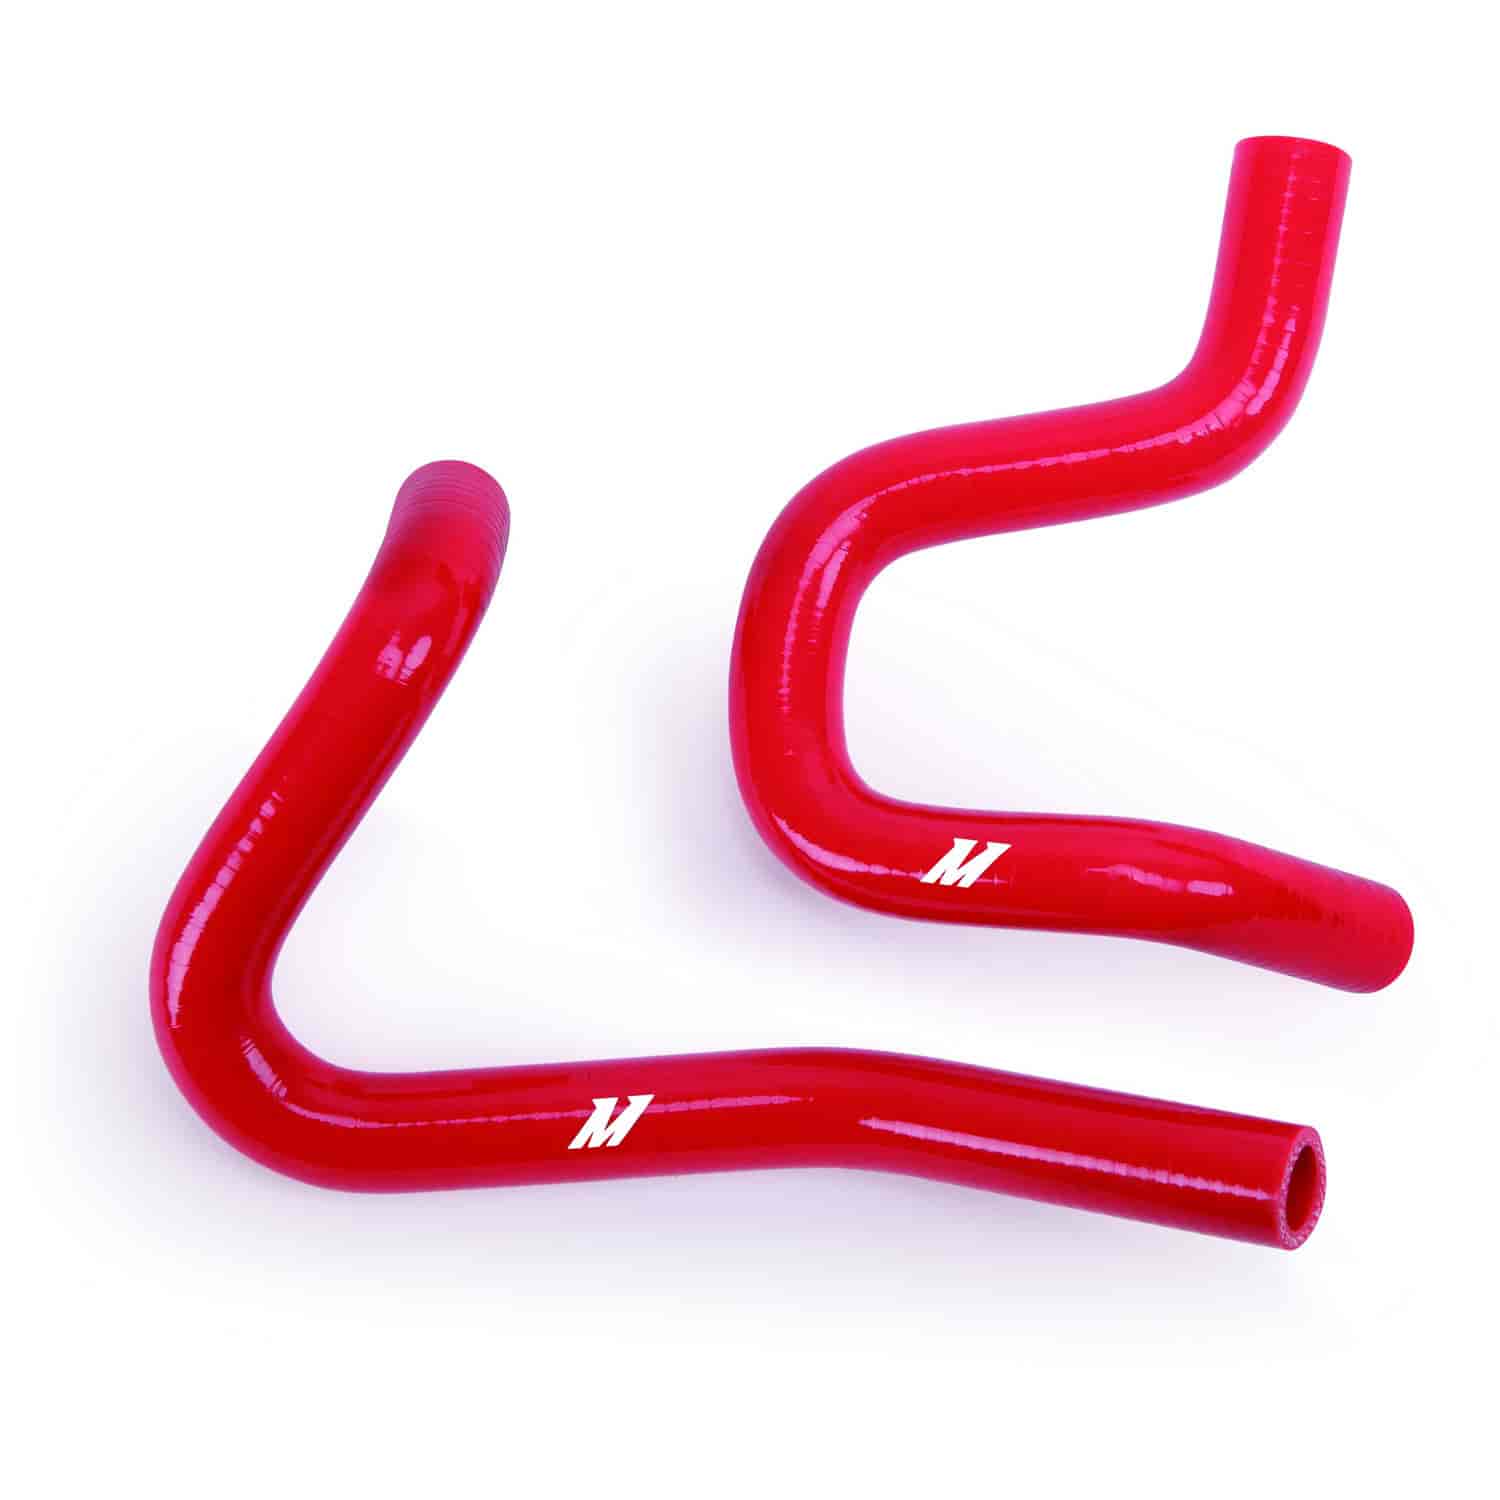 Hyundai Genesis Coupe 2.0T Silicone Heater Hose Kit - MFG Part No. MMHOSE-GEN4-10THHRD